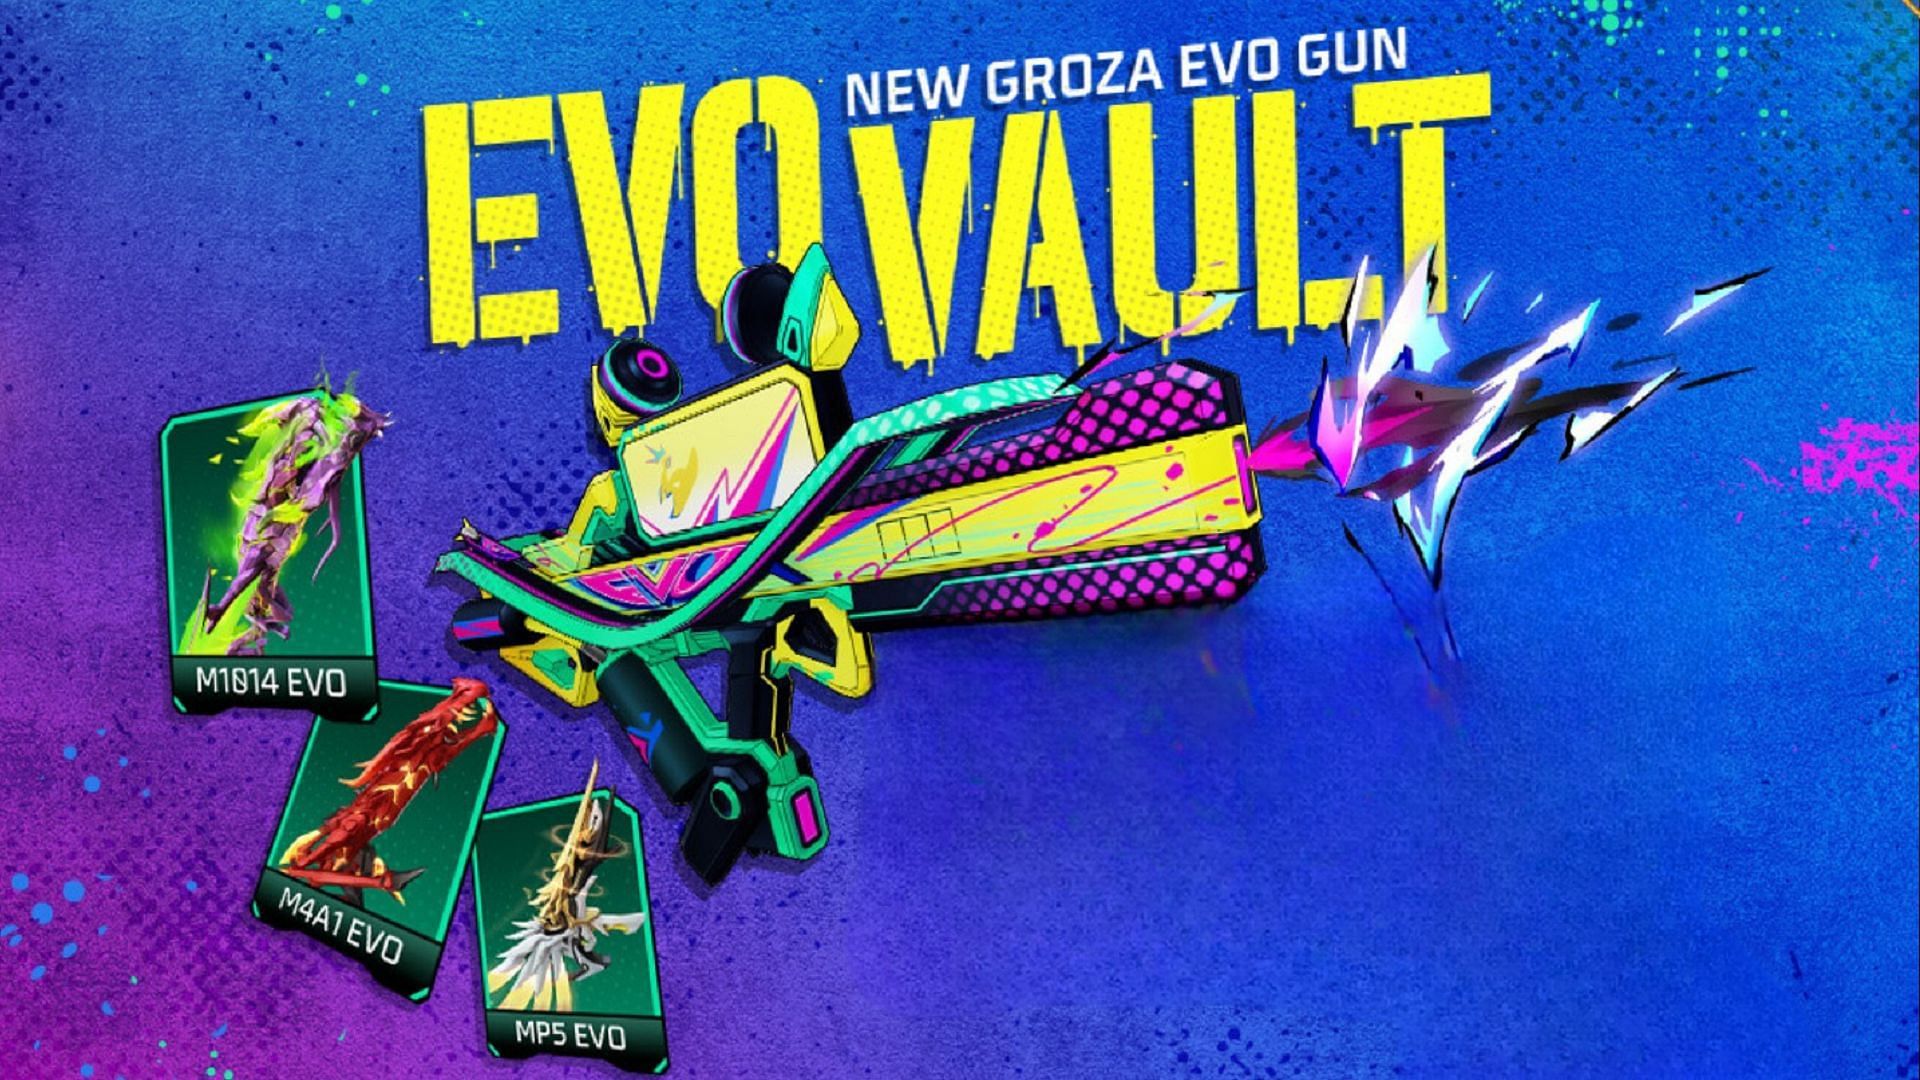 A new Evo gun has been added to Free Fire (Image via Garena)